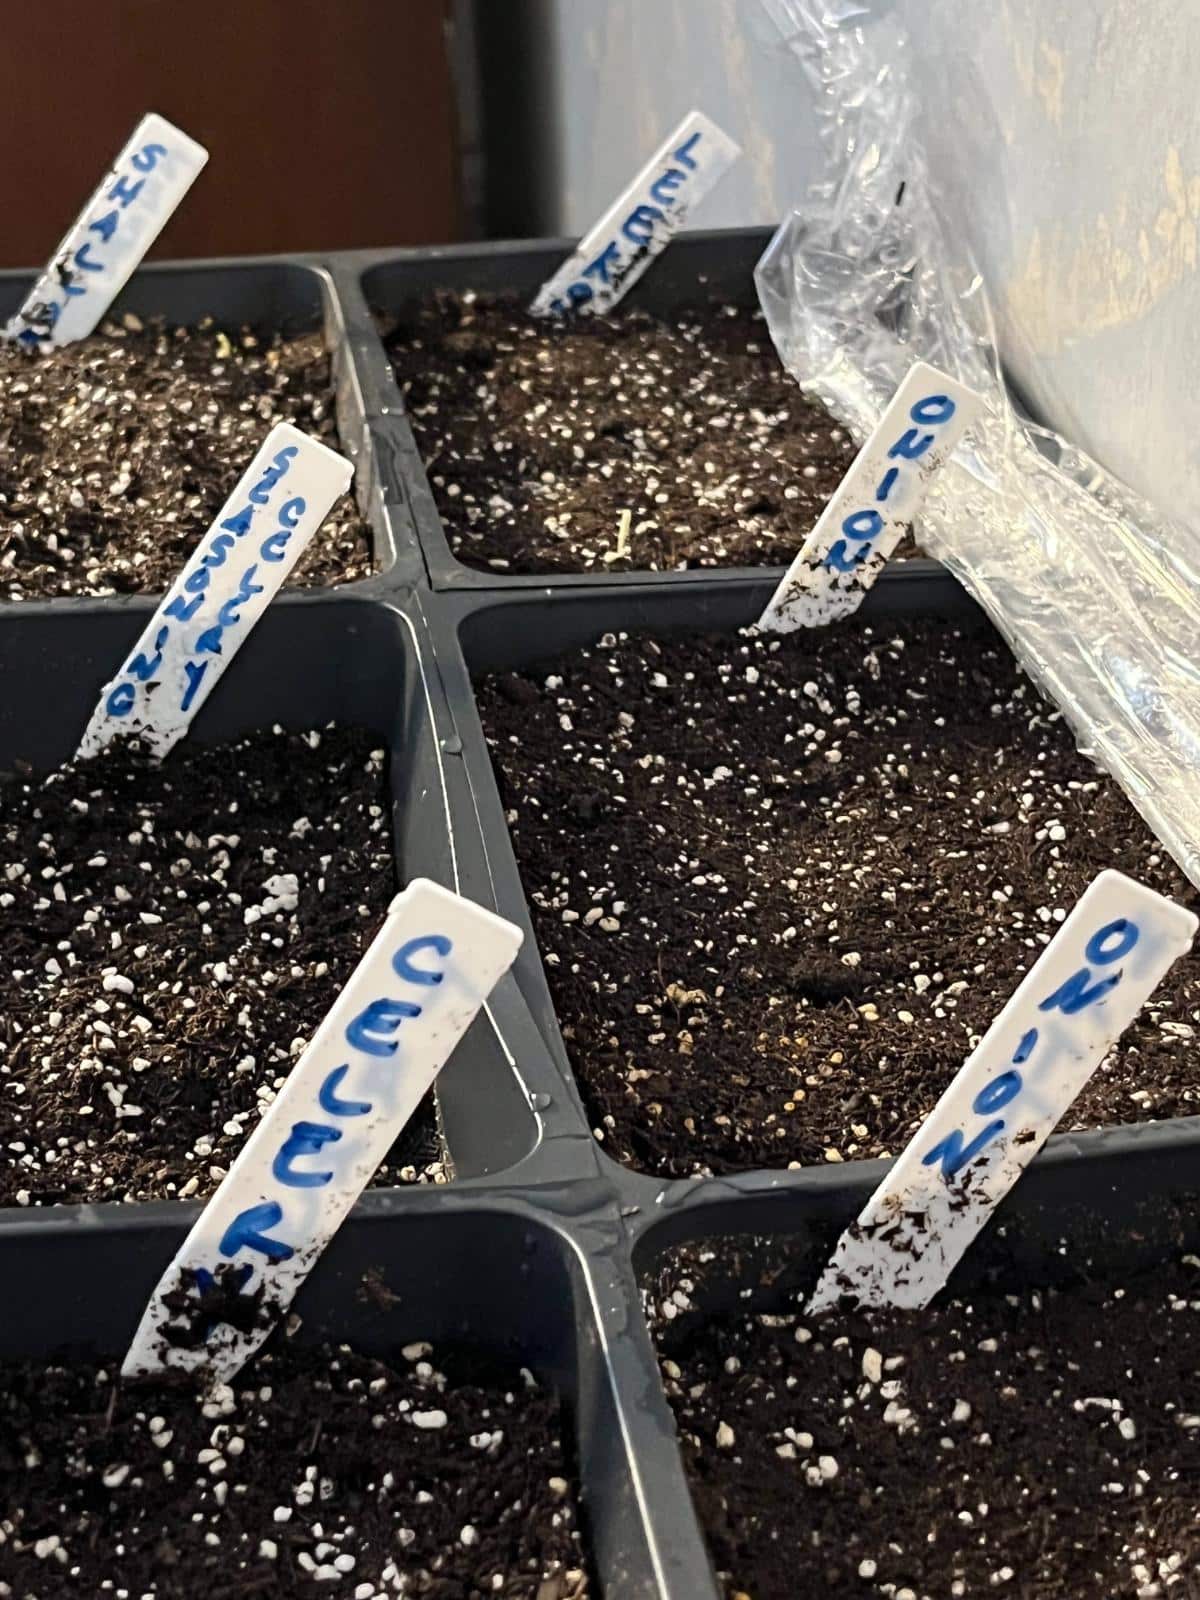 Seeds planted in germination pots